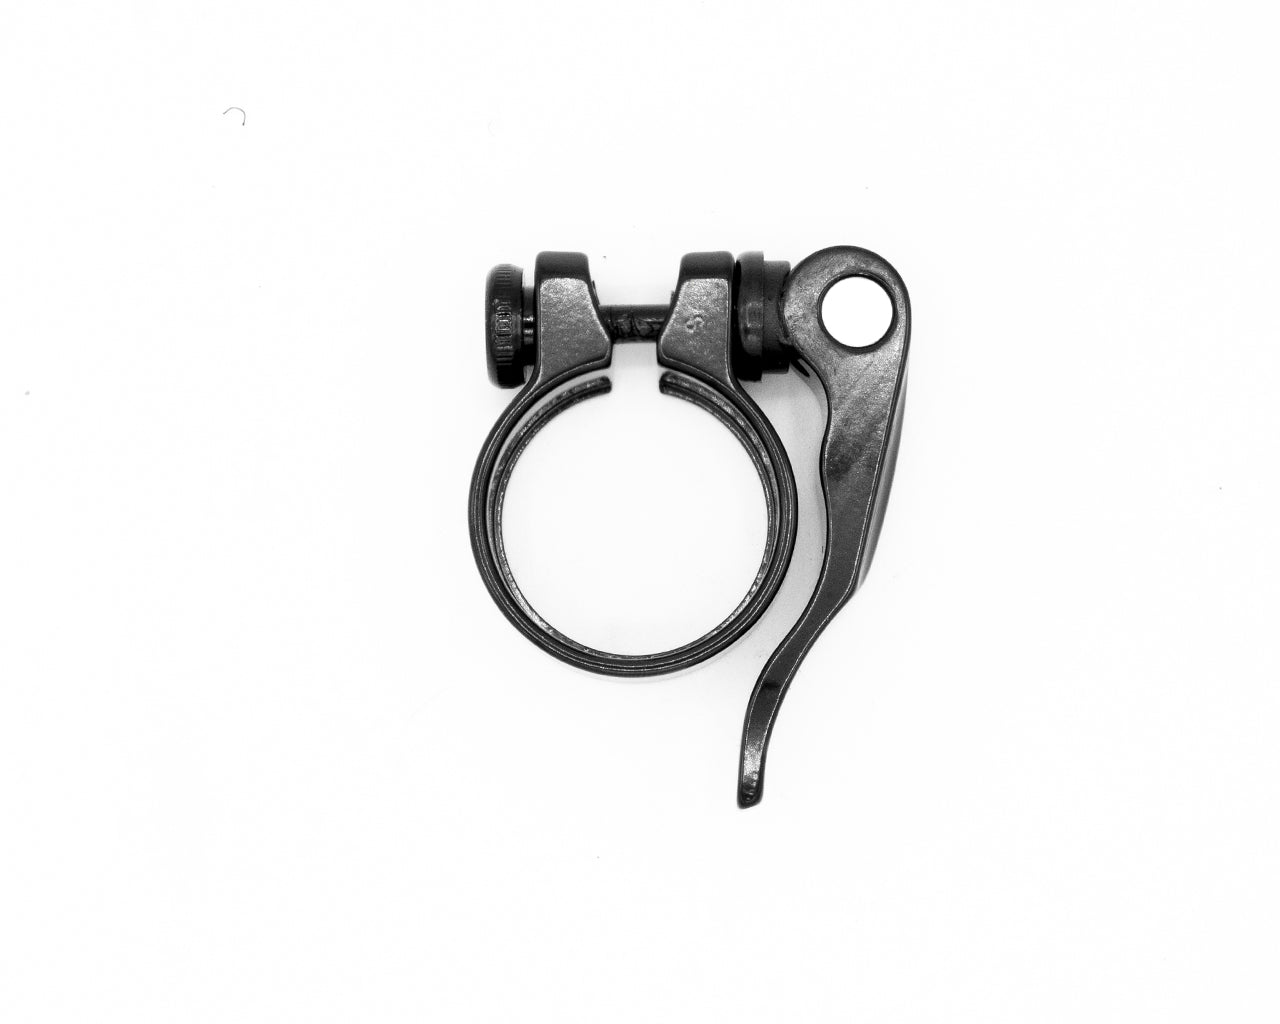 Seatpost Clamp - Babymaker Pro and Standard | Superhuman